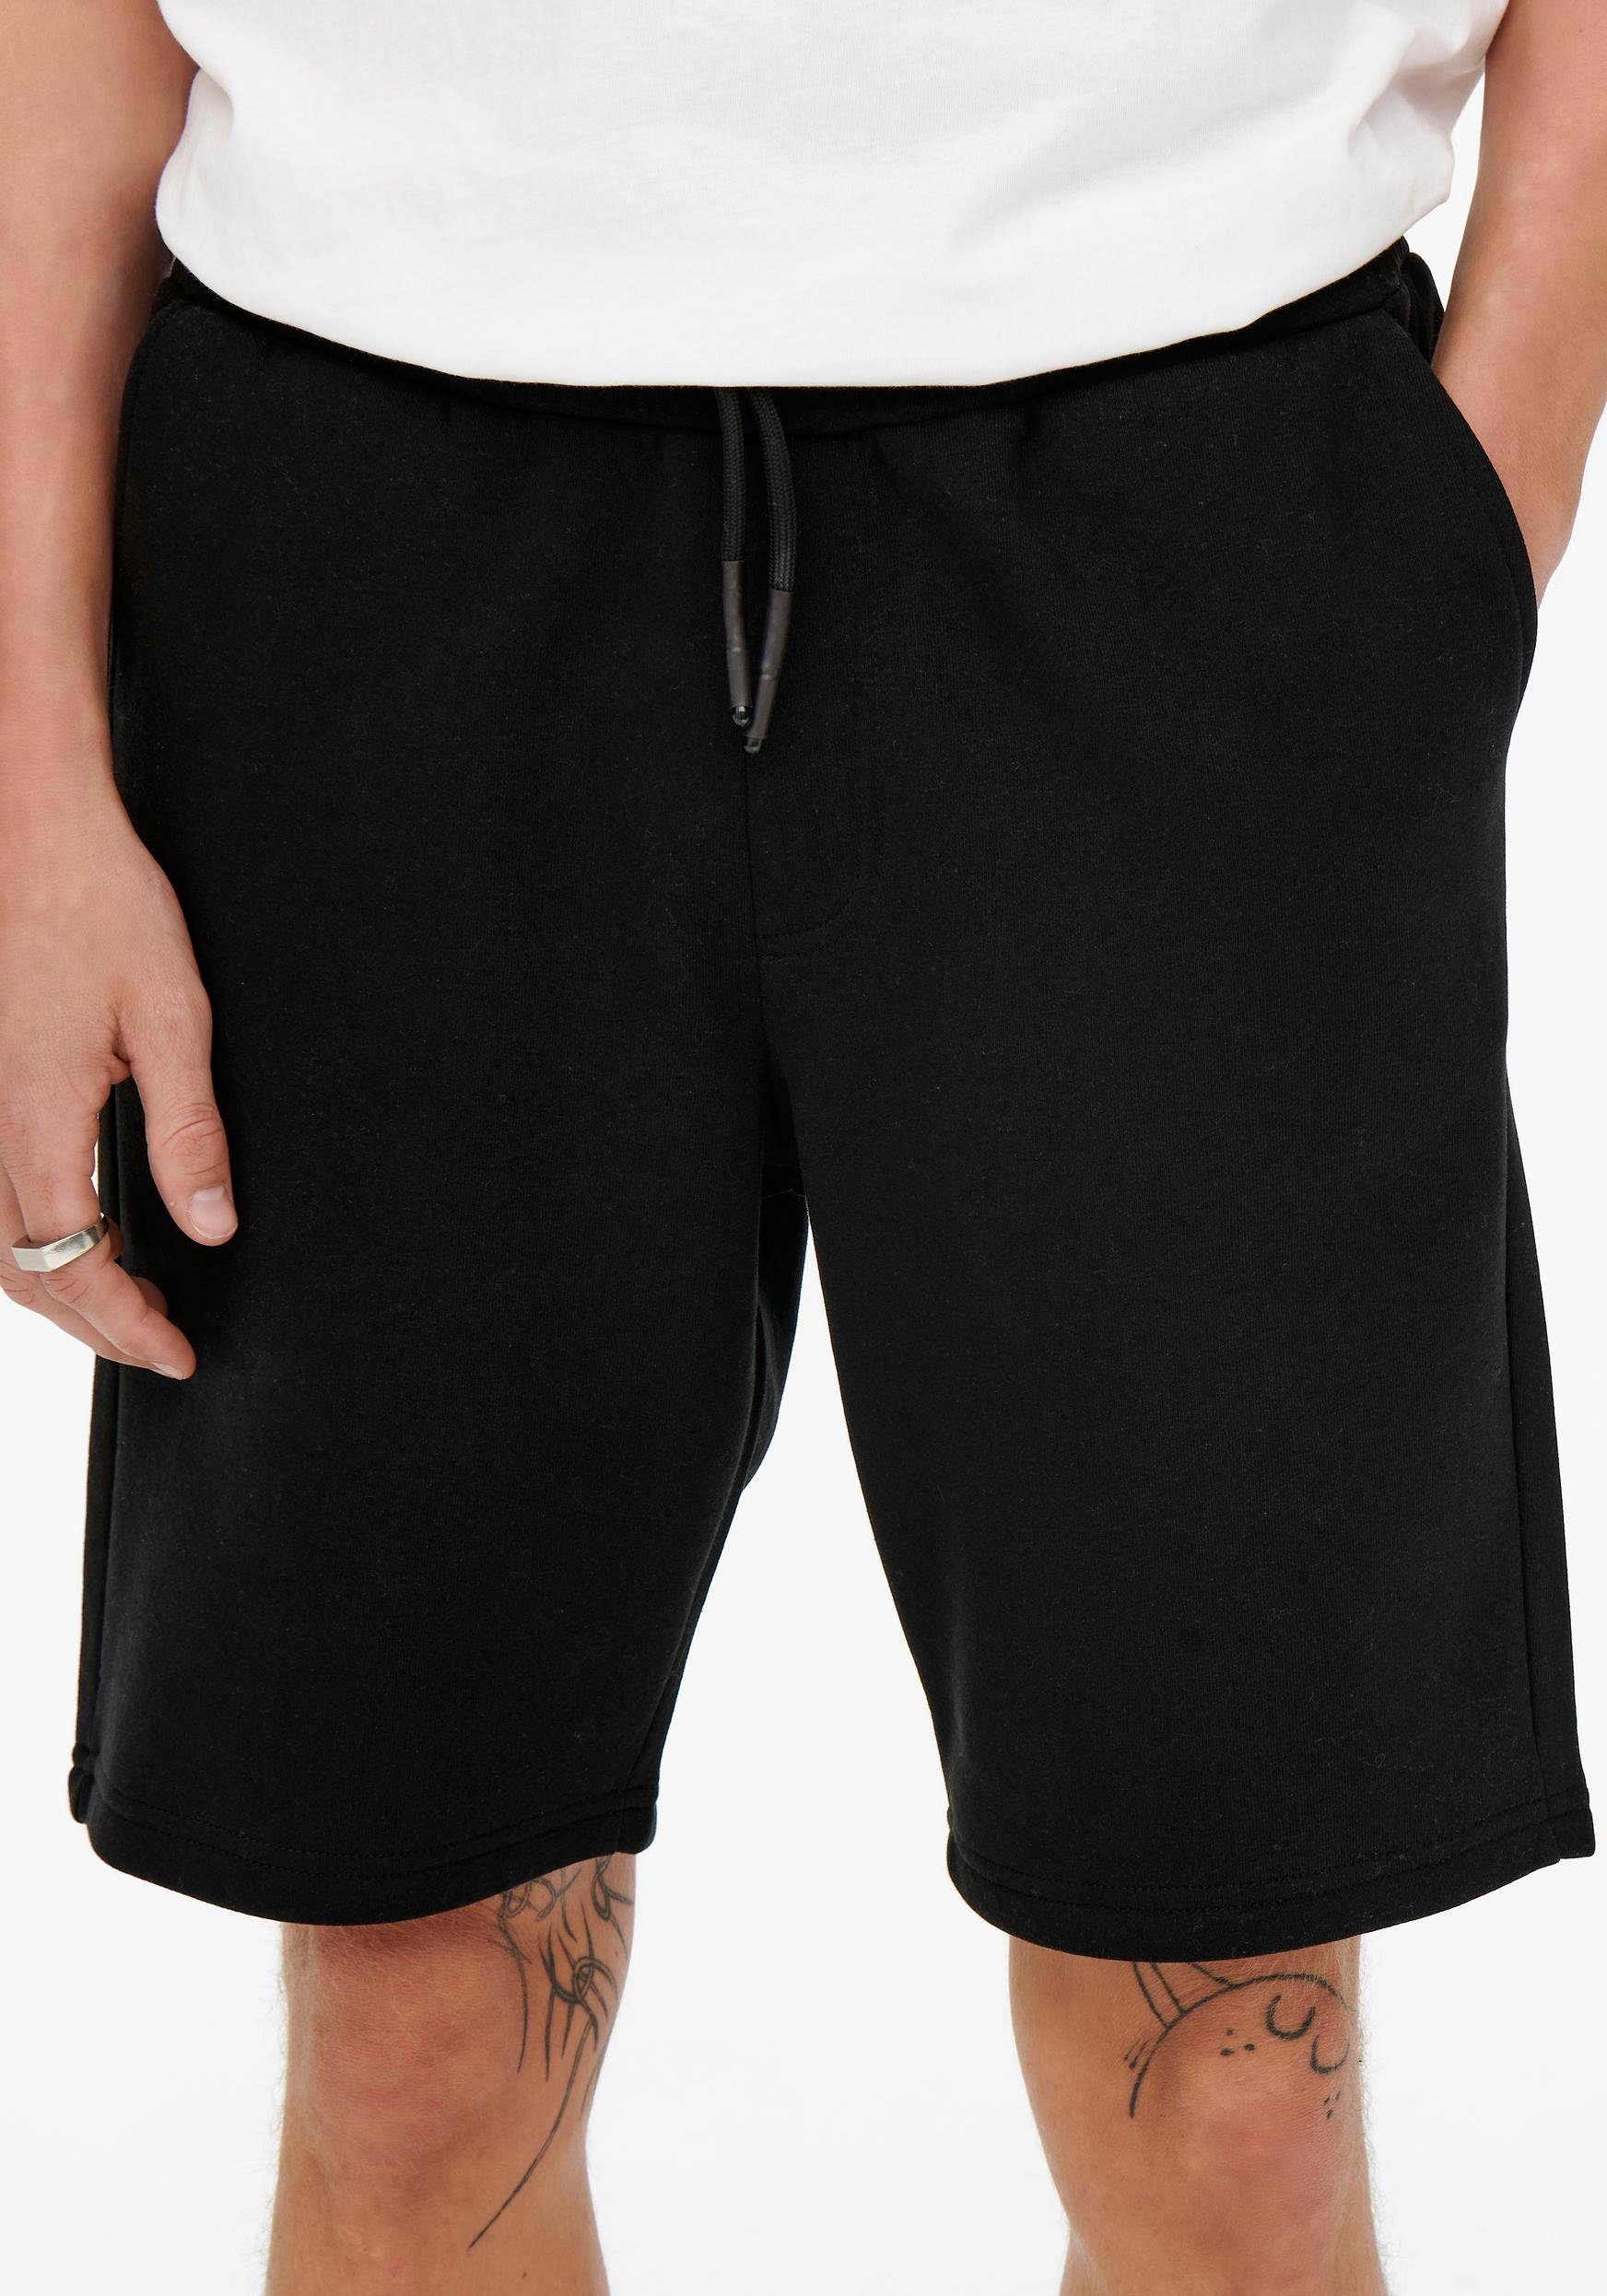 ONLY & ONSCERES SHORTS SWEAT SONS Black Sweatshorts